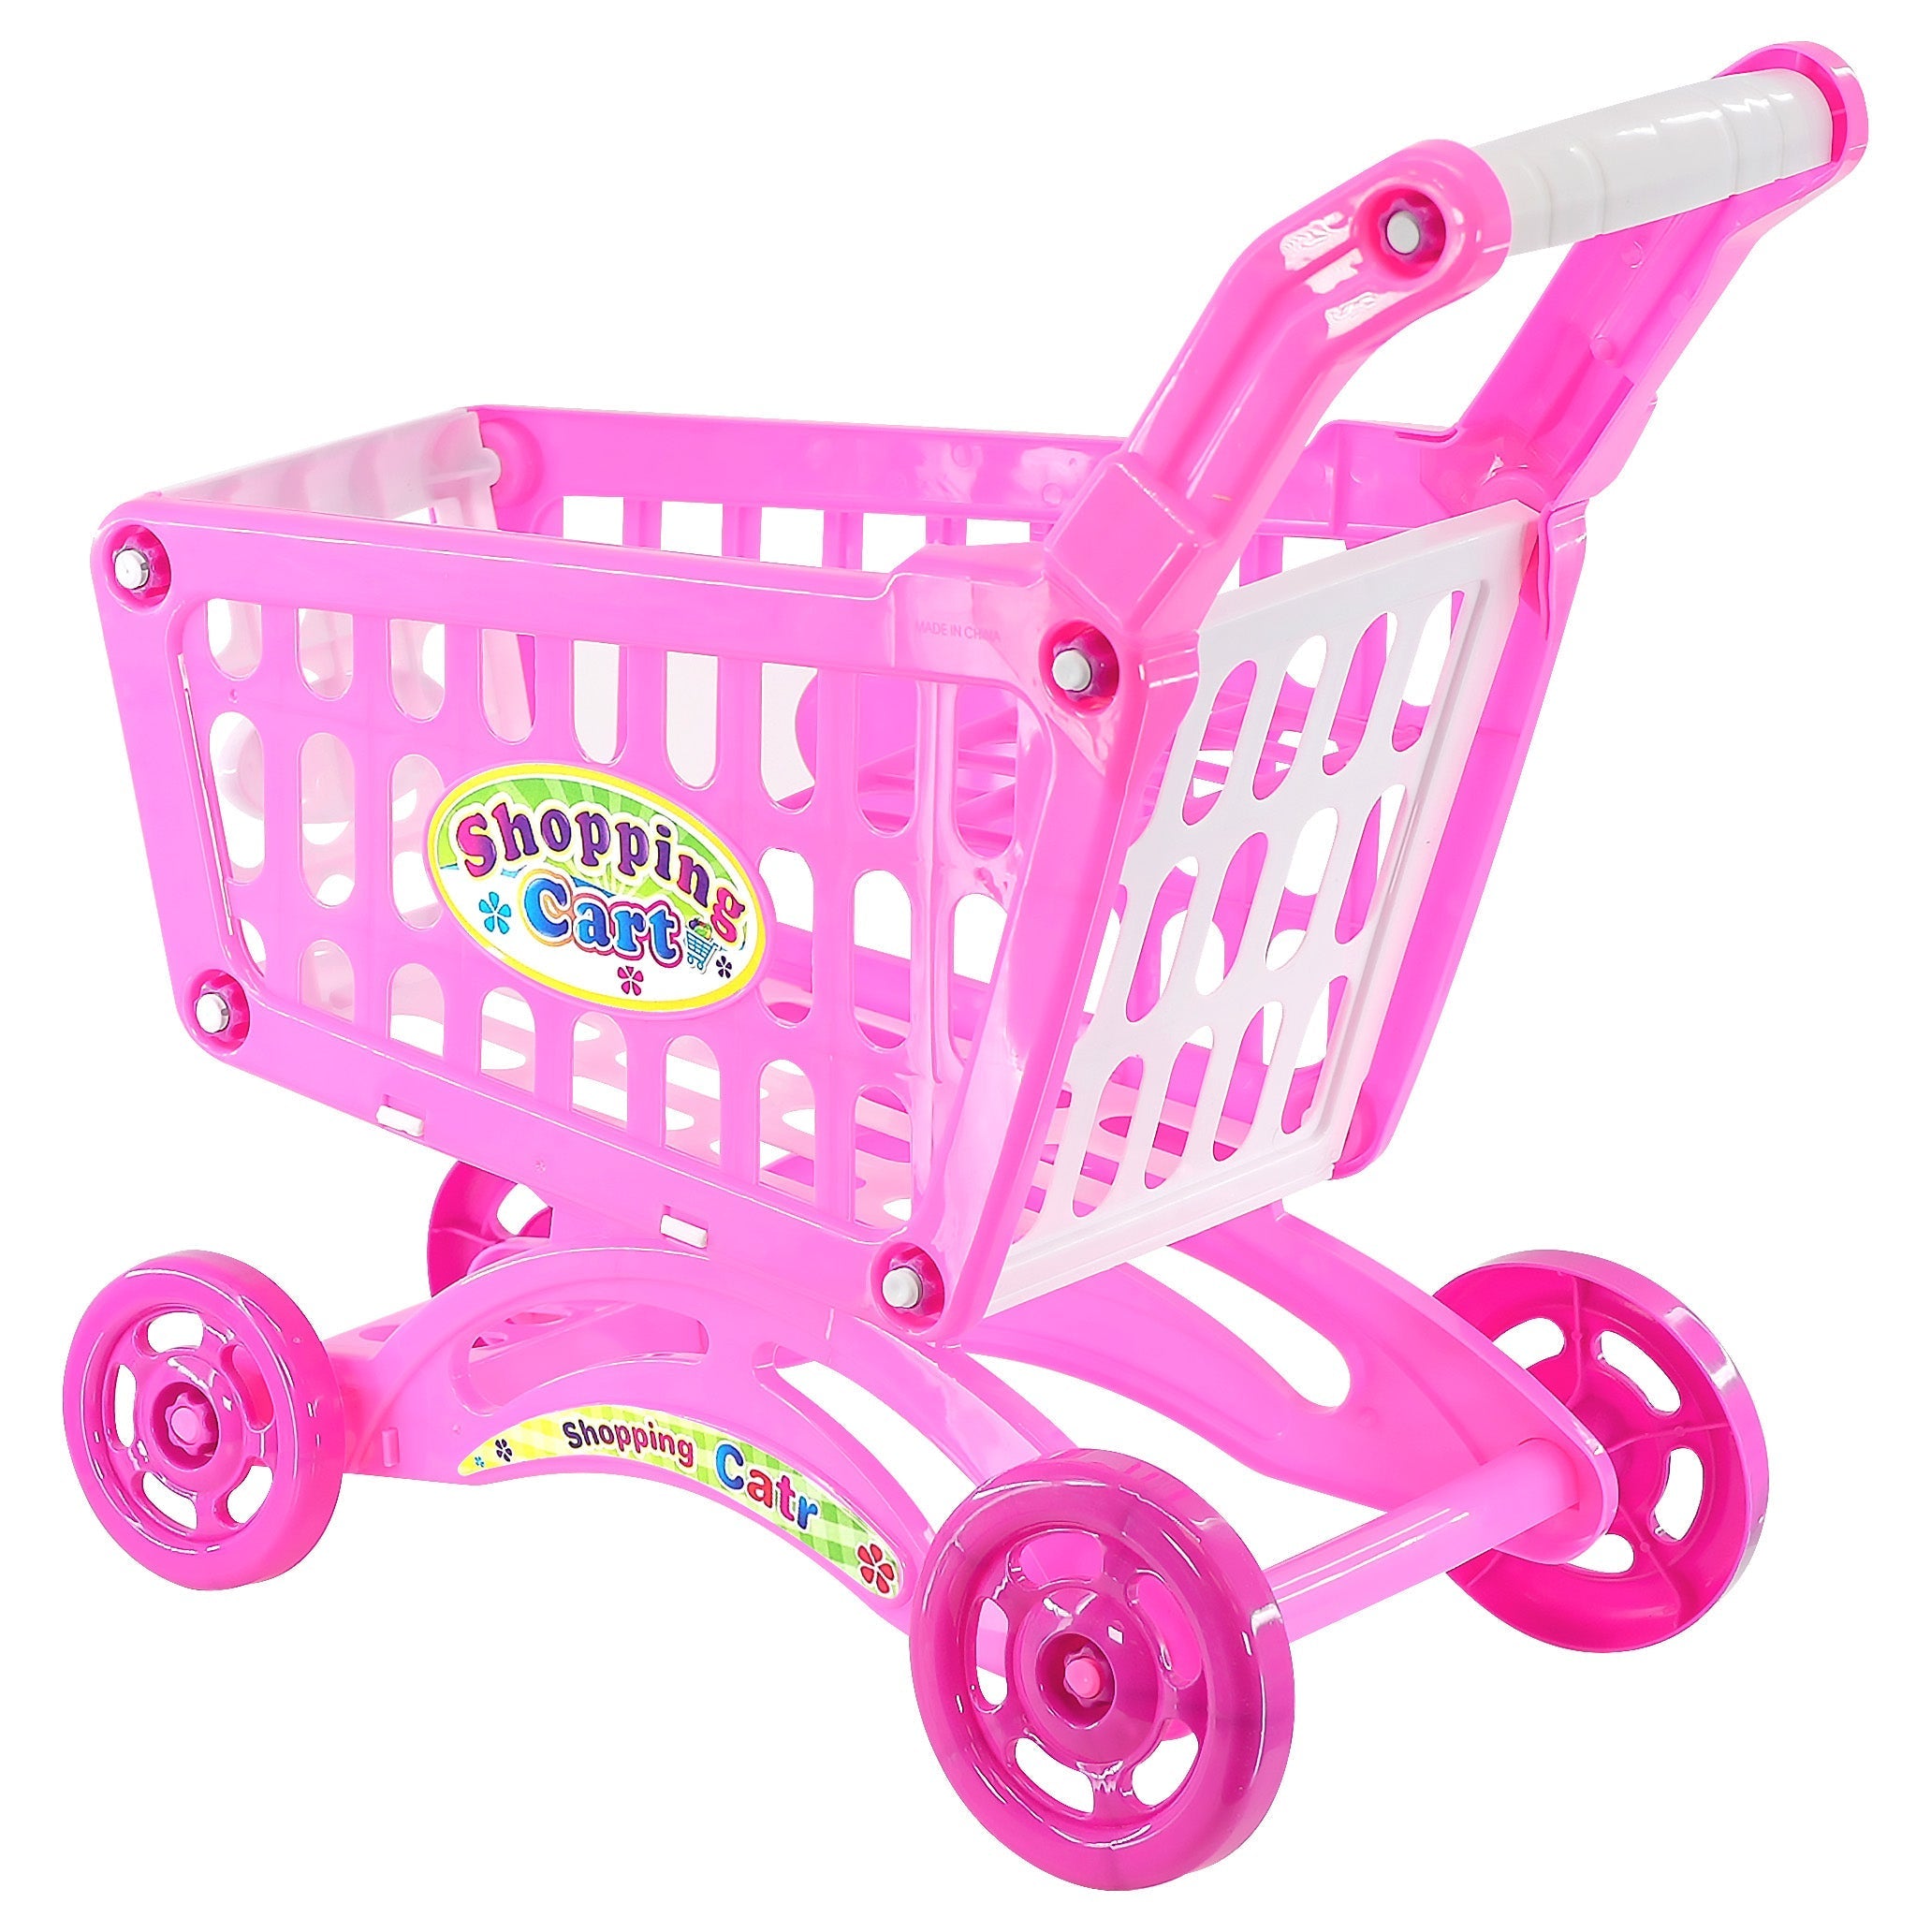 The Magic Toy Shop Playset Pink Shopping Trolley Cart Play Food Set